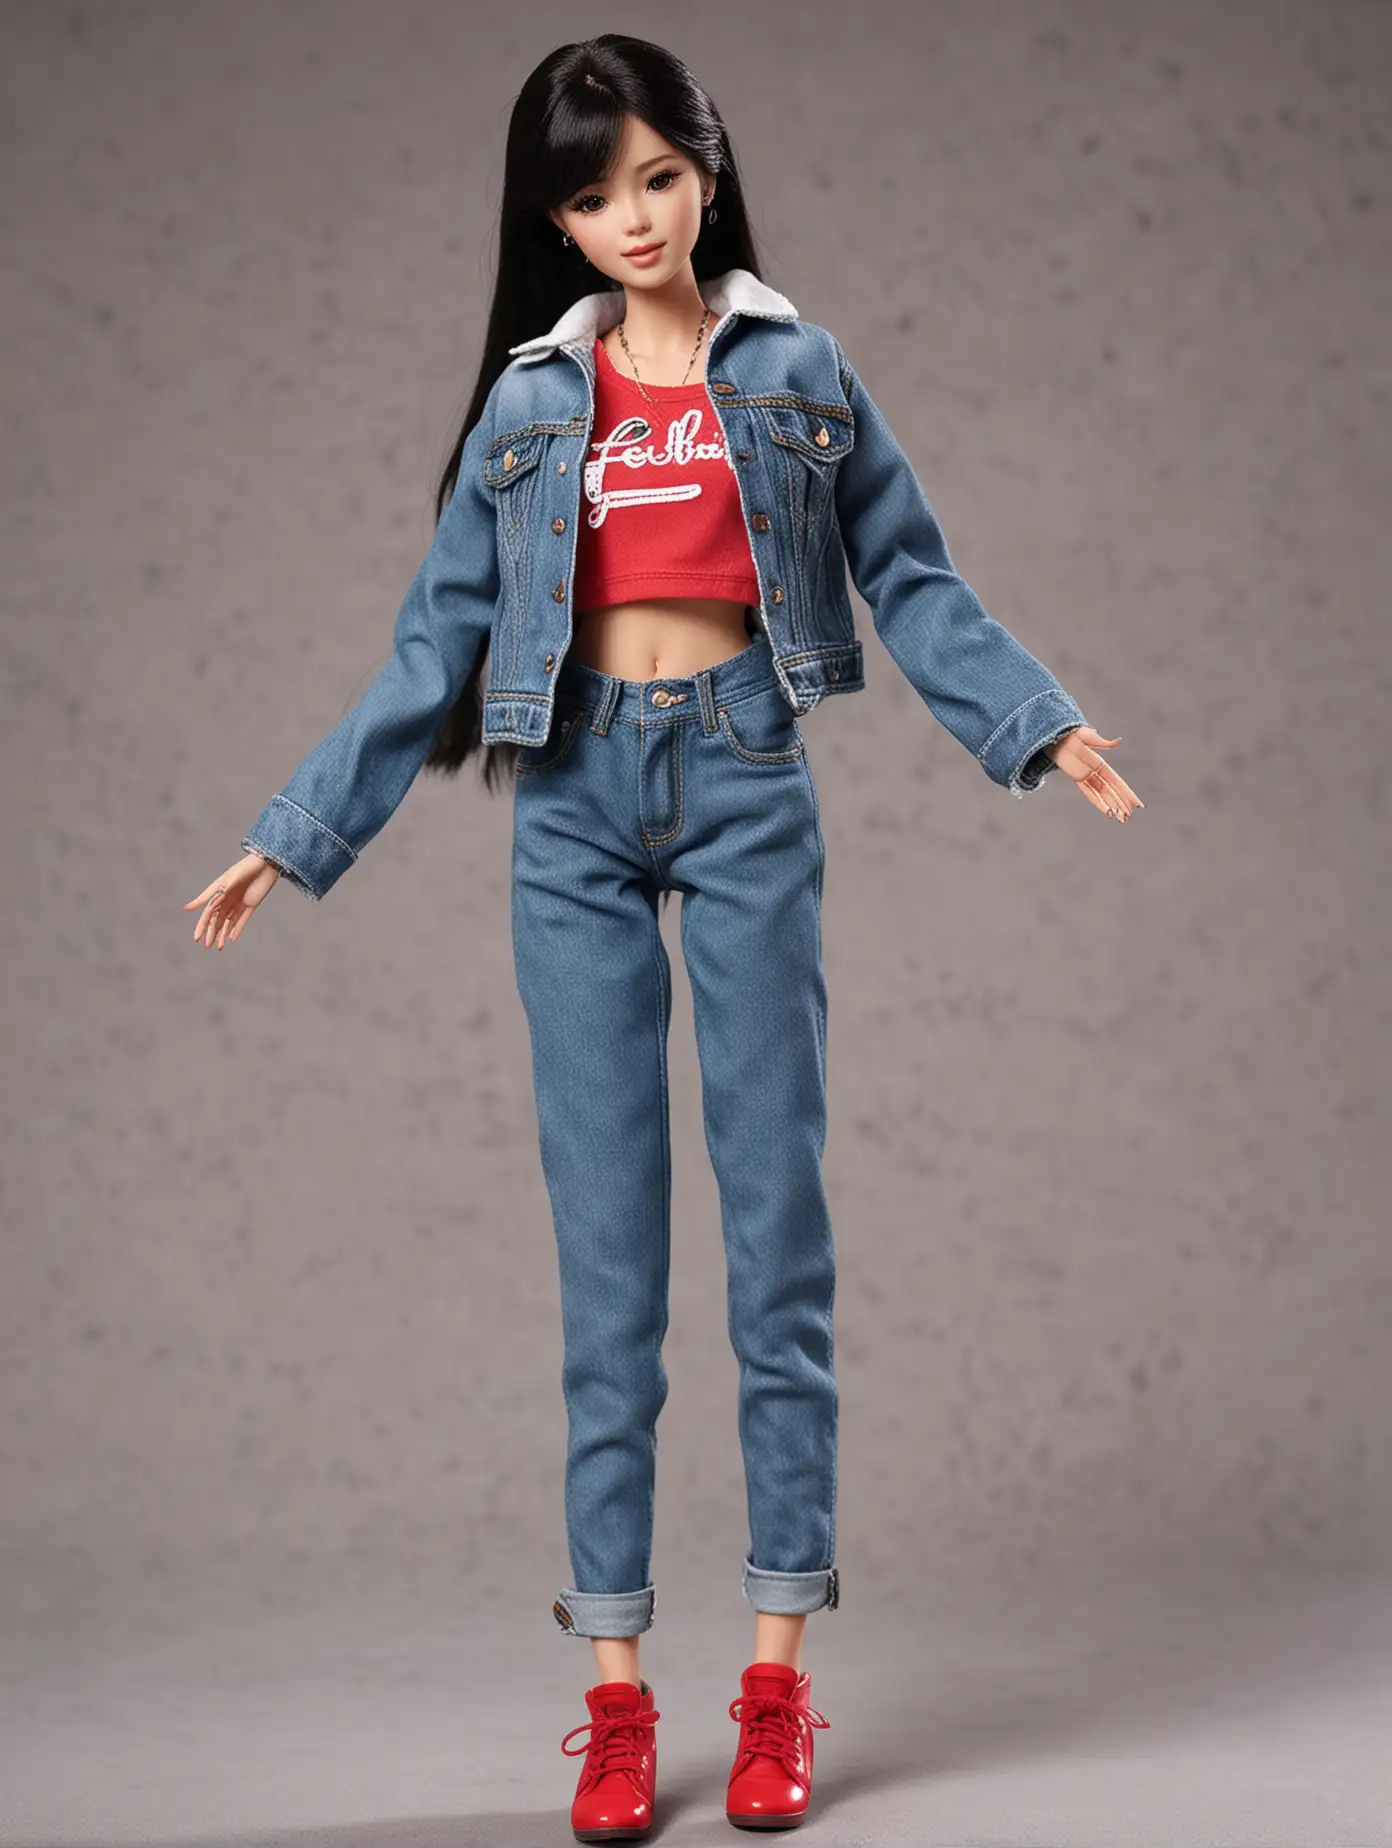 Stylish Teenage Barbie Doll with Black Hair and Levis Outfit